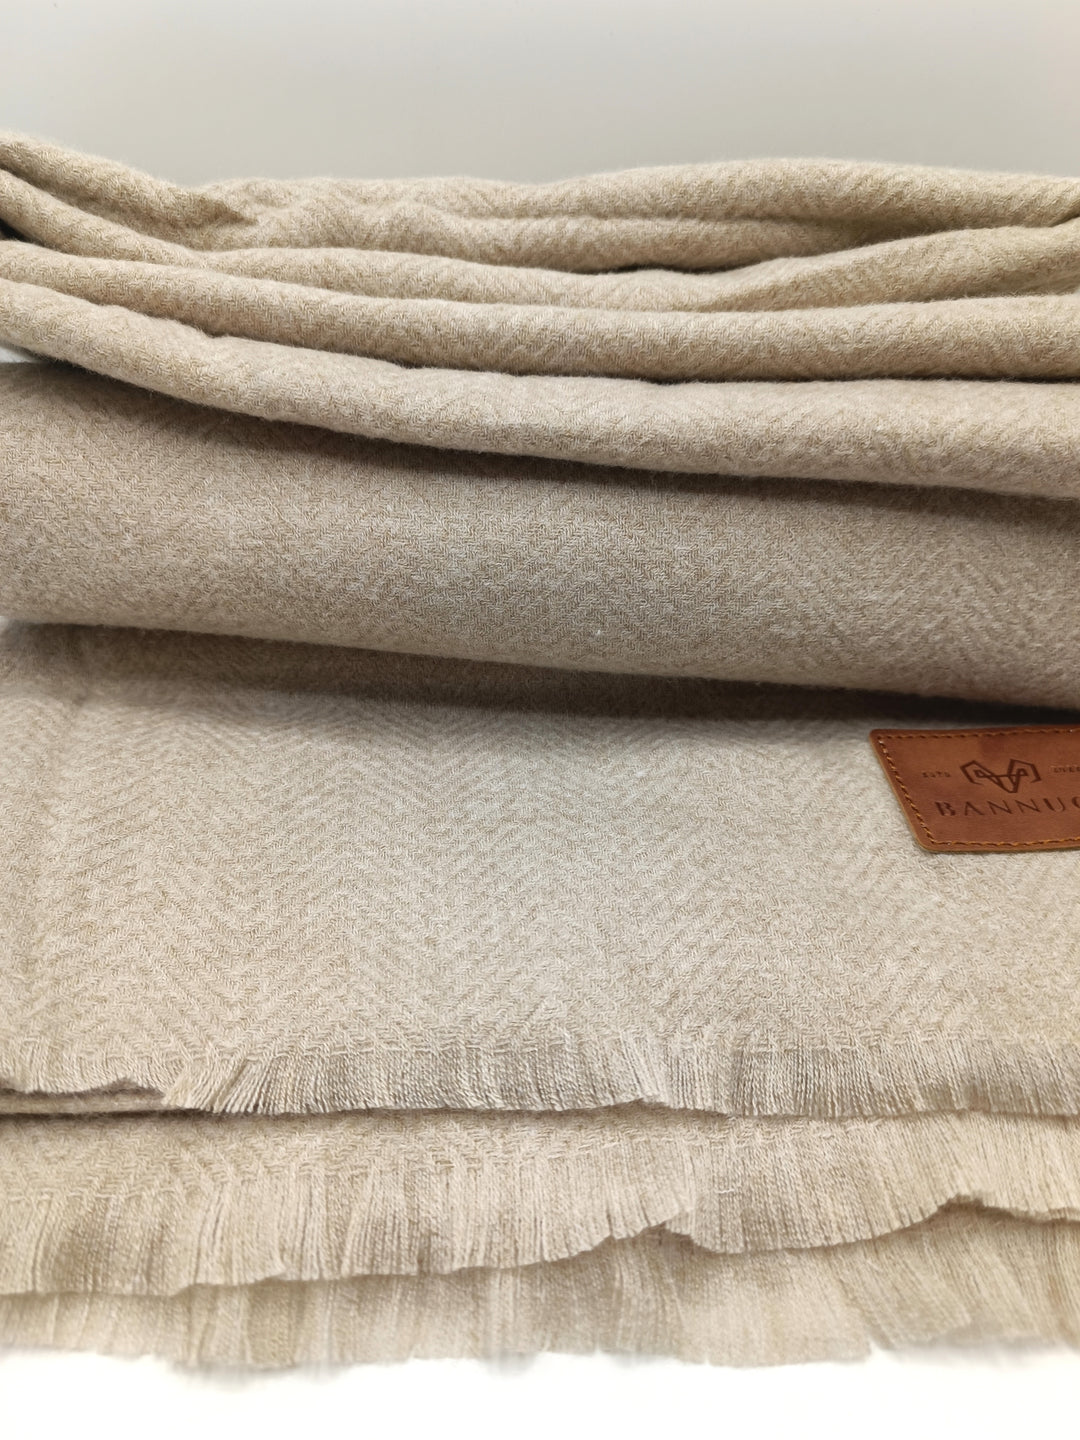 Premium Quality Extremely Soft Light Brown Color Pashmina Cashmere Shawl for Men